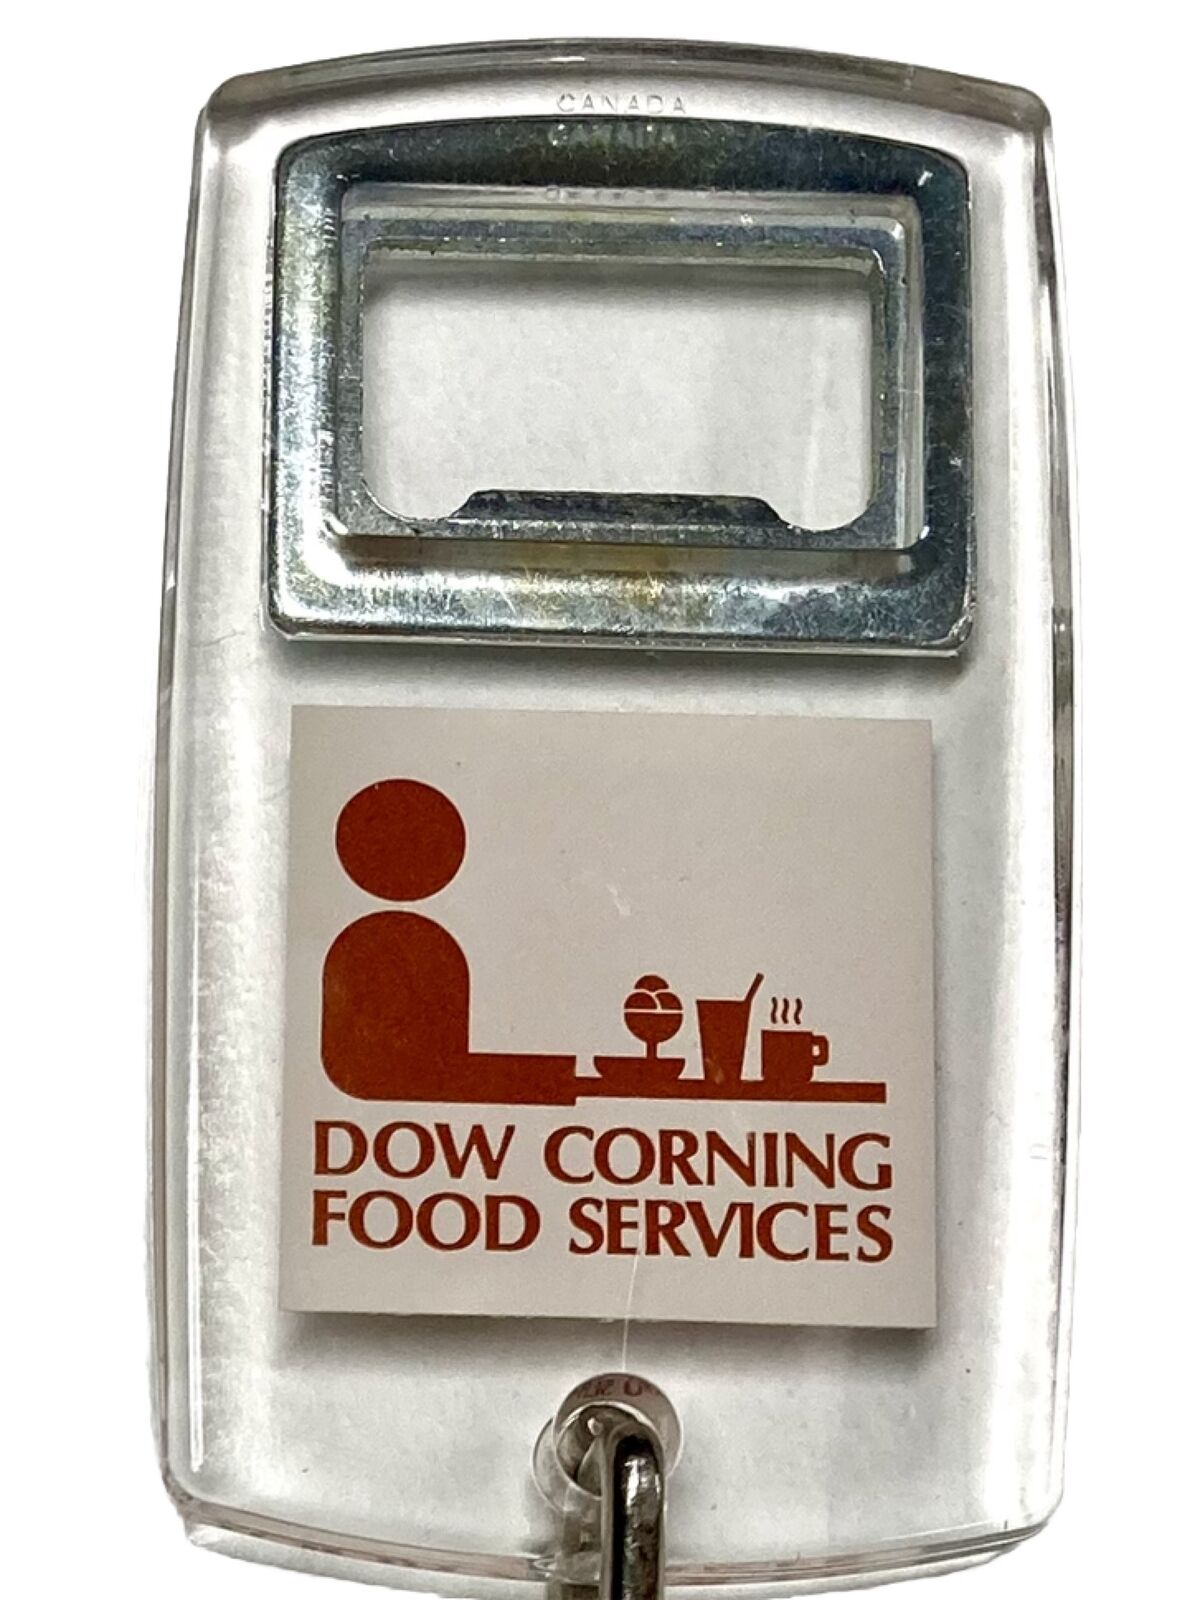 Vintage Dow Corning Food Services Bottle Opener & Keychain Clear Plastic